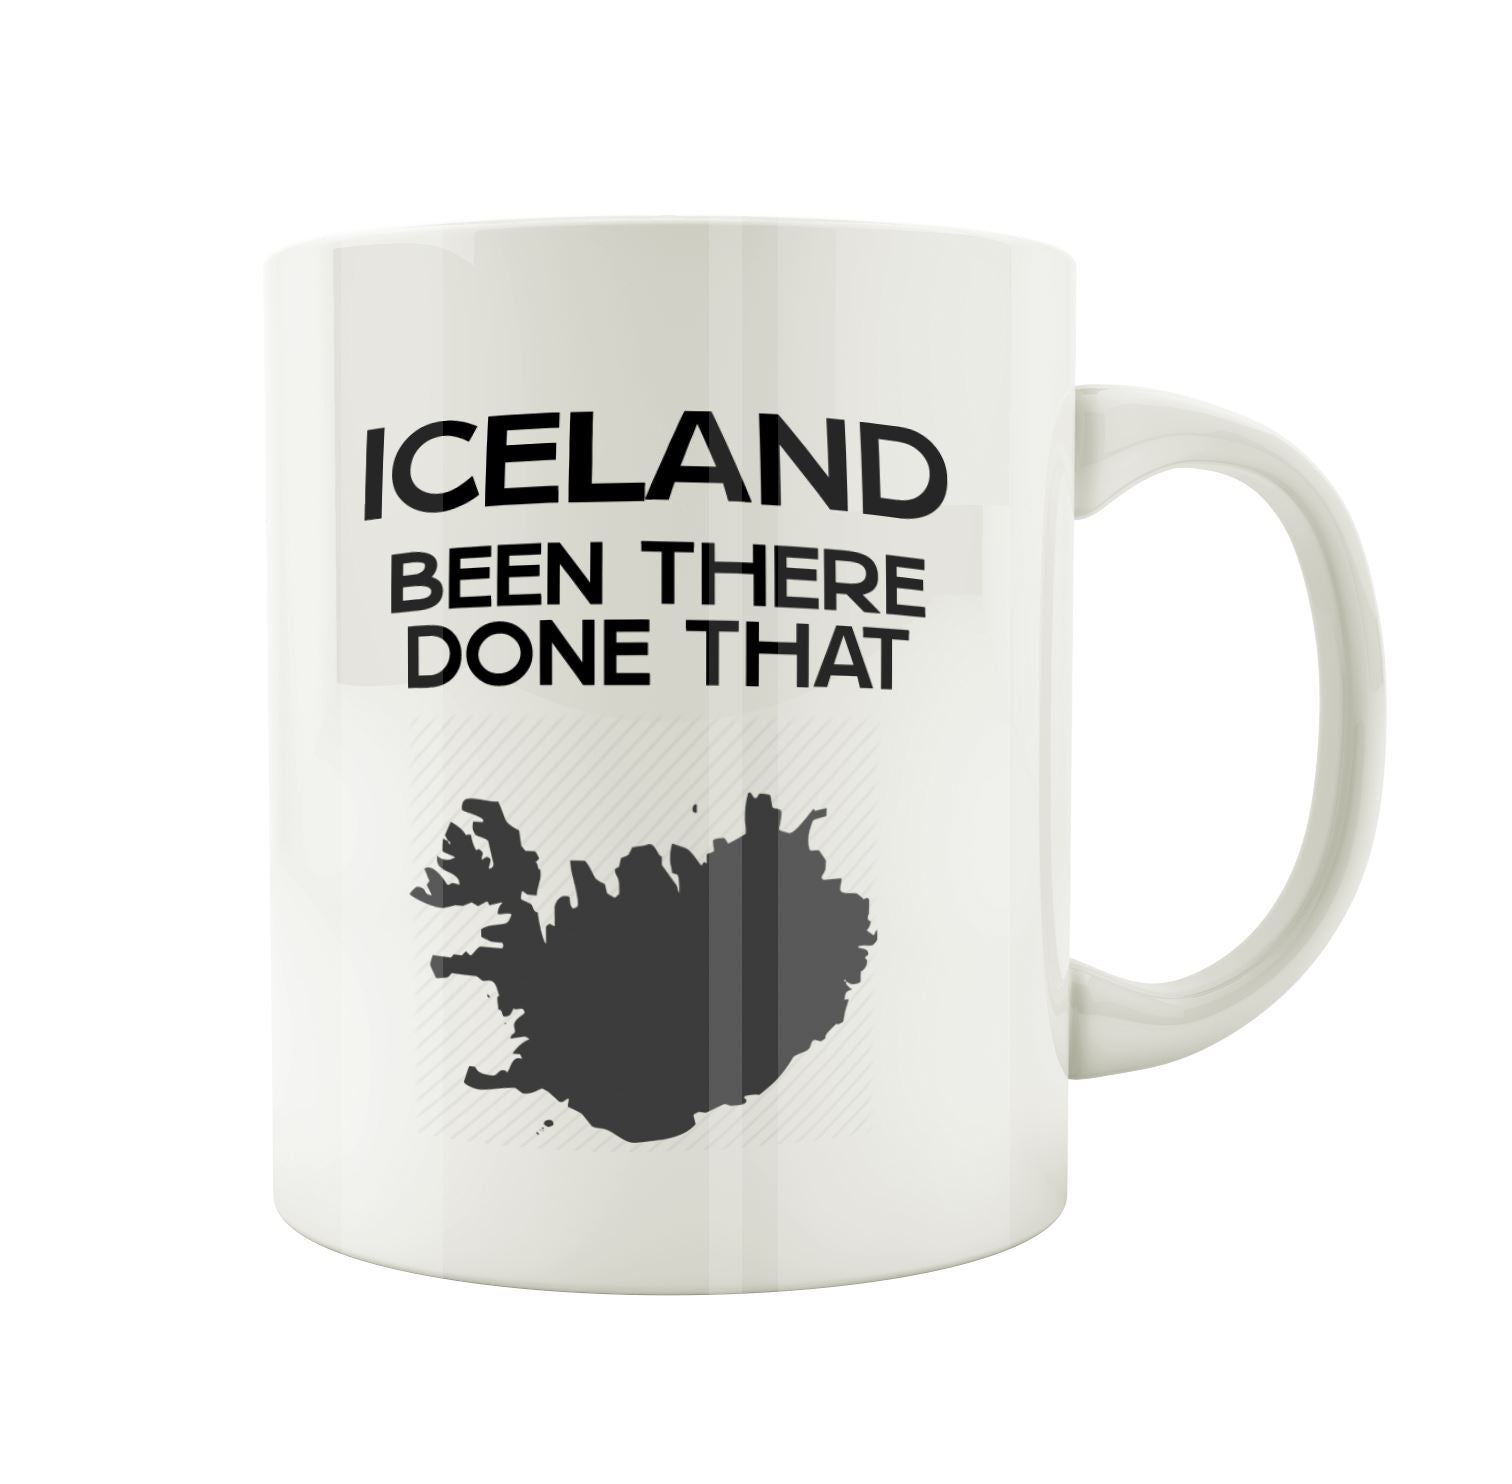 Iceland been there done that